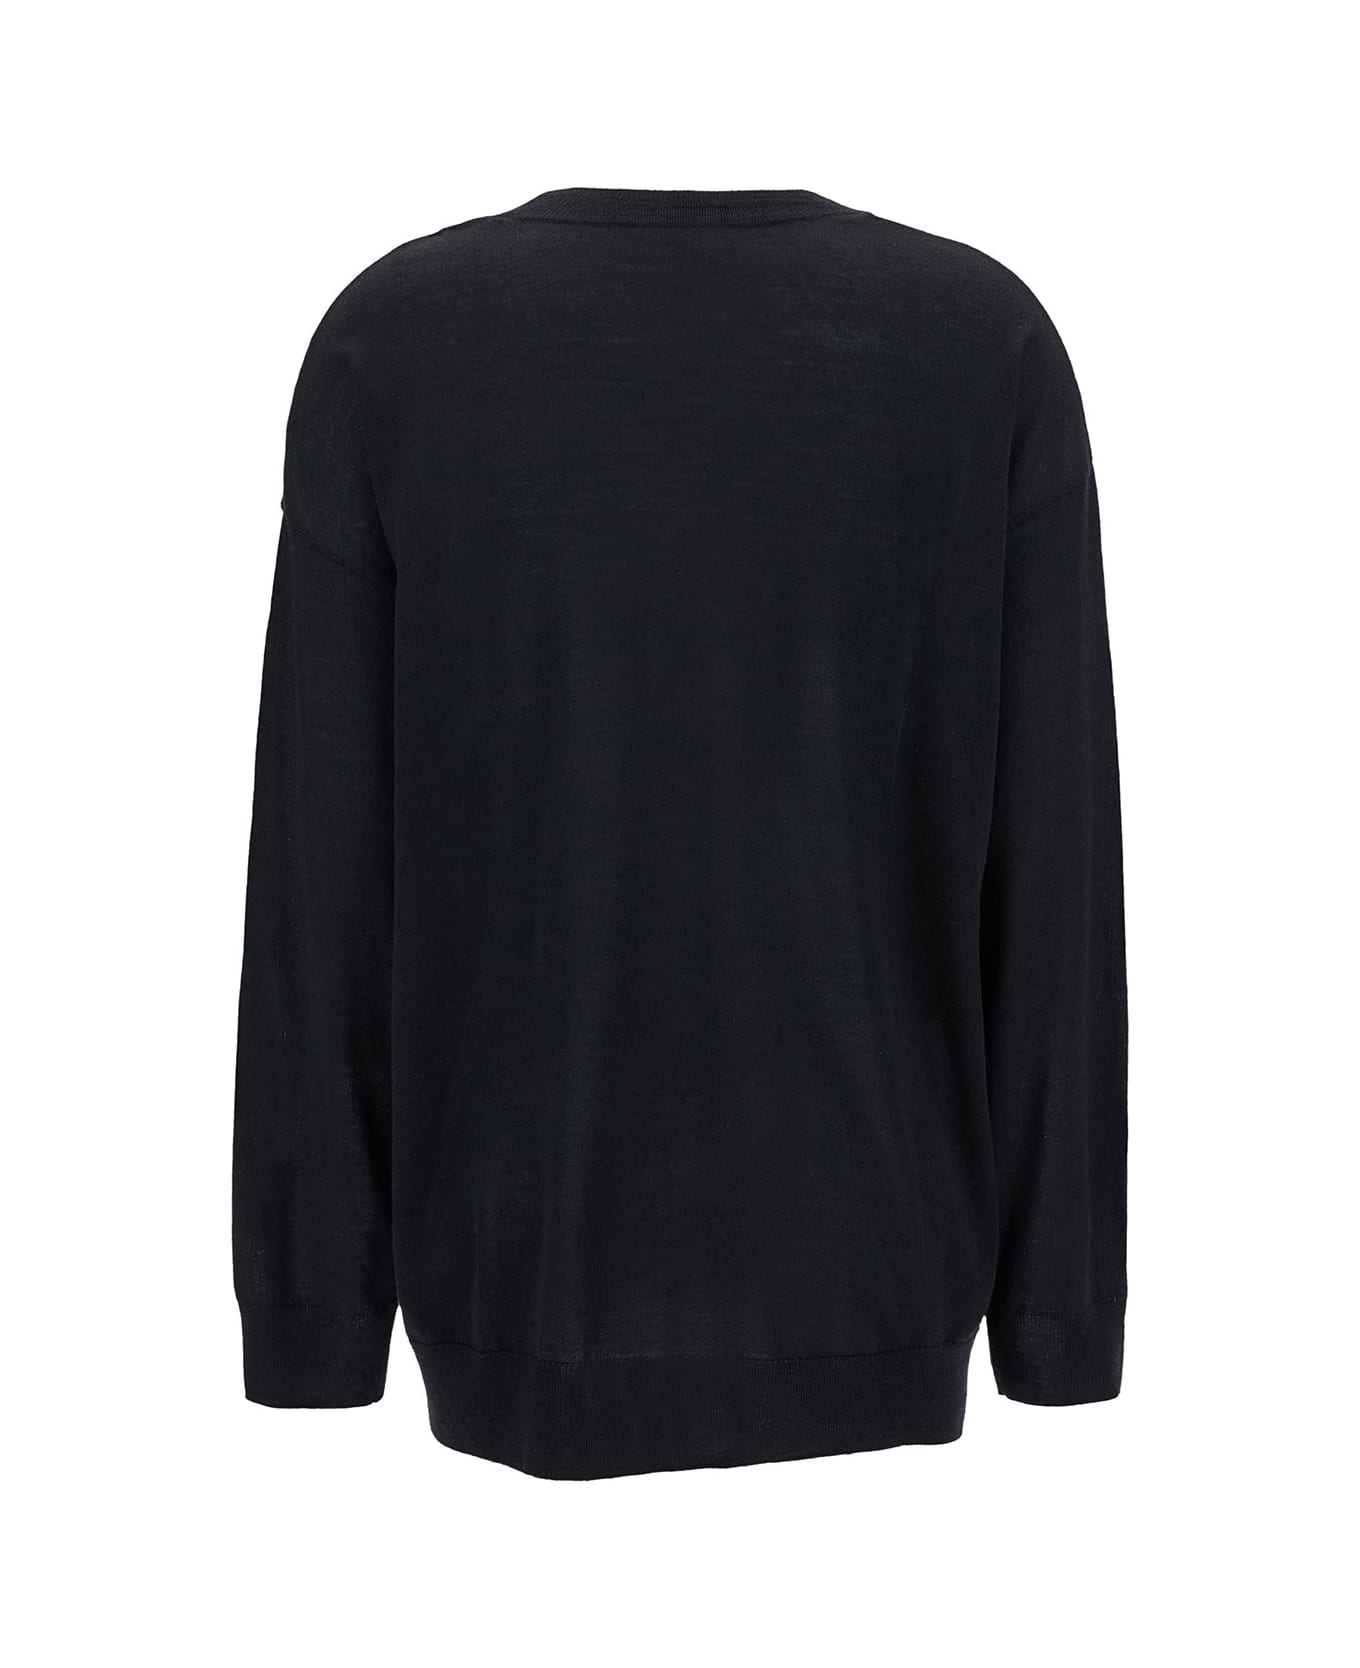 Parosh Black Relaxed Sweater With Ribbed Knit In Wool And Silk Woman - Black